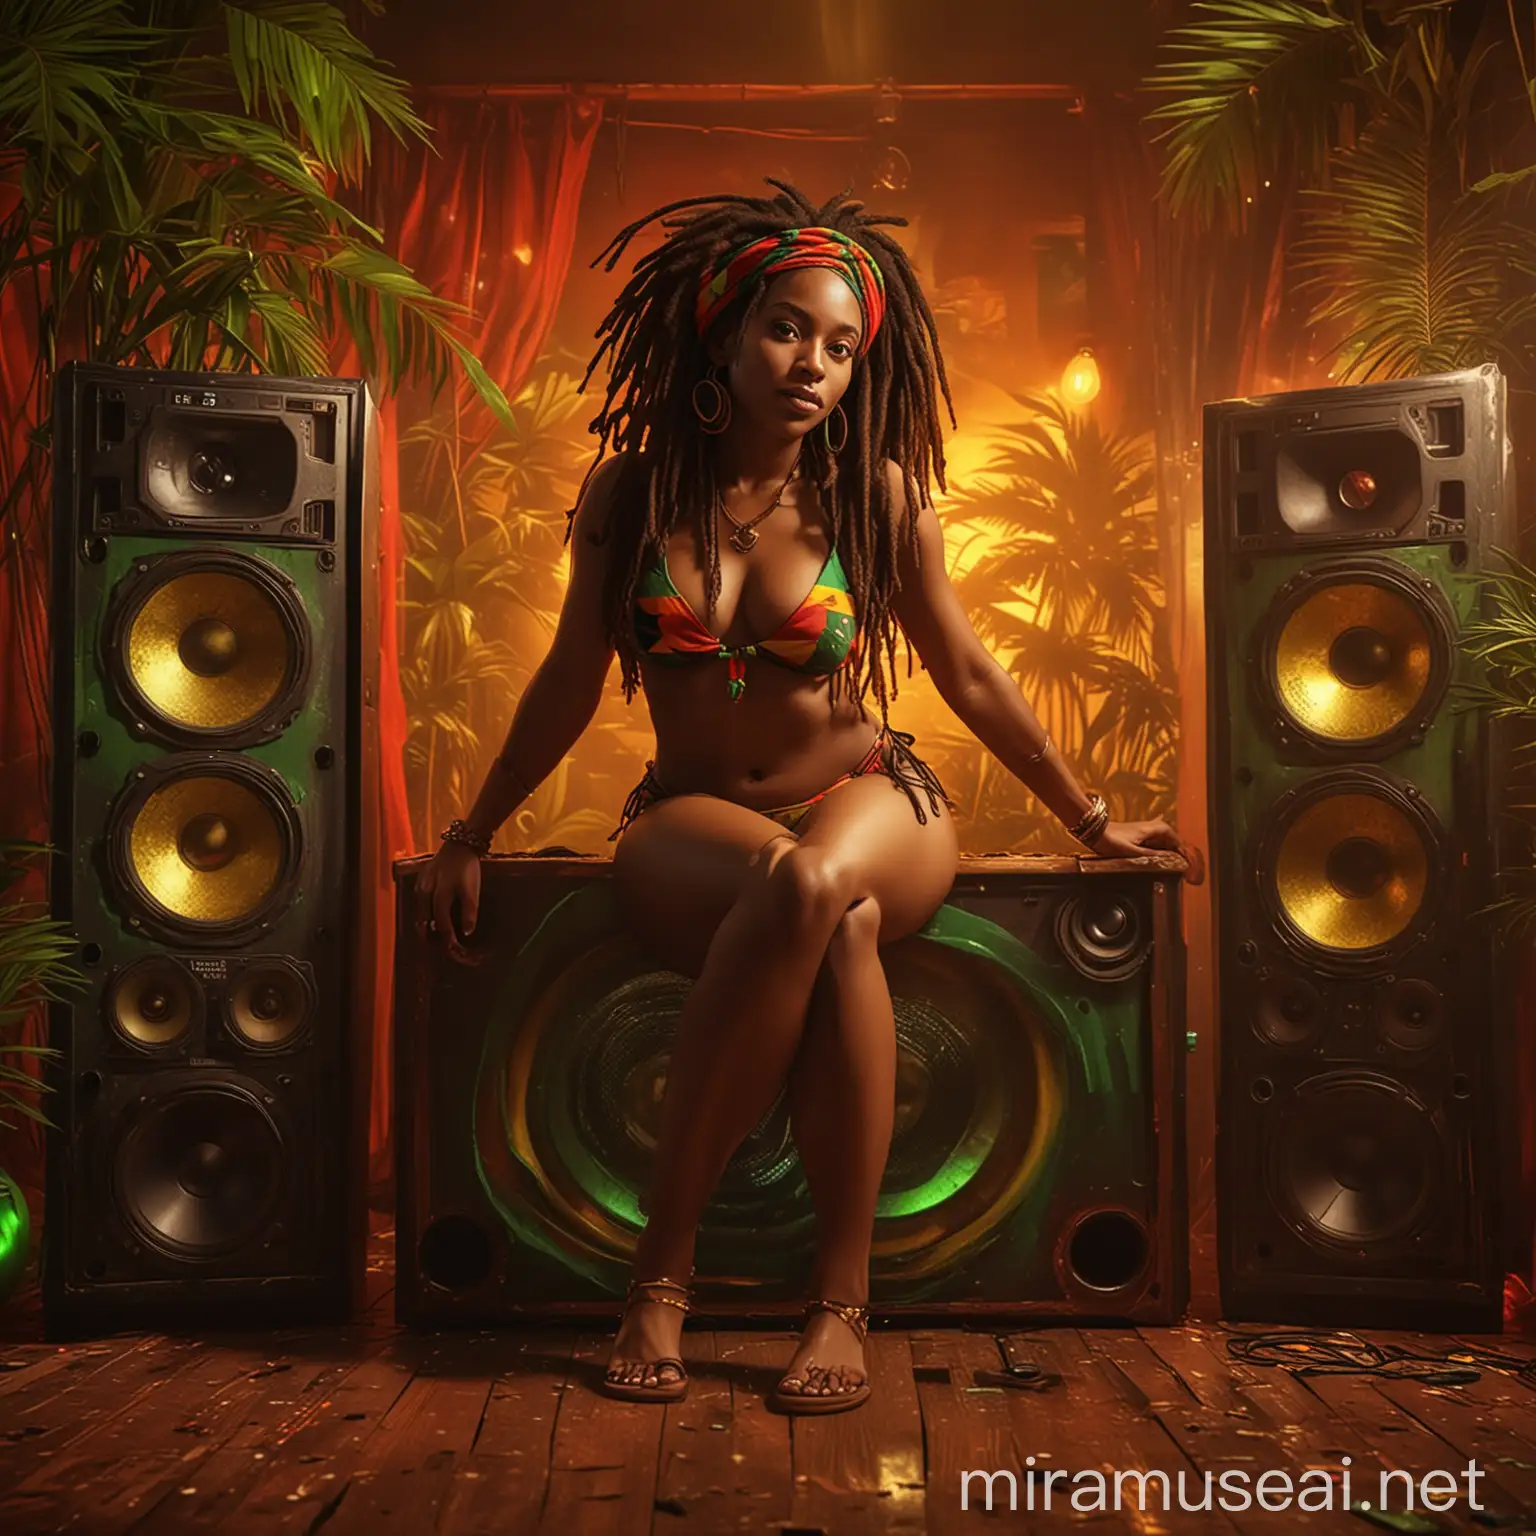 RastaInspired Female Model Relaxing in Dancehall Setting with Chiaroscuro Effect